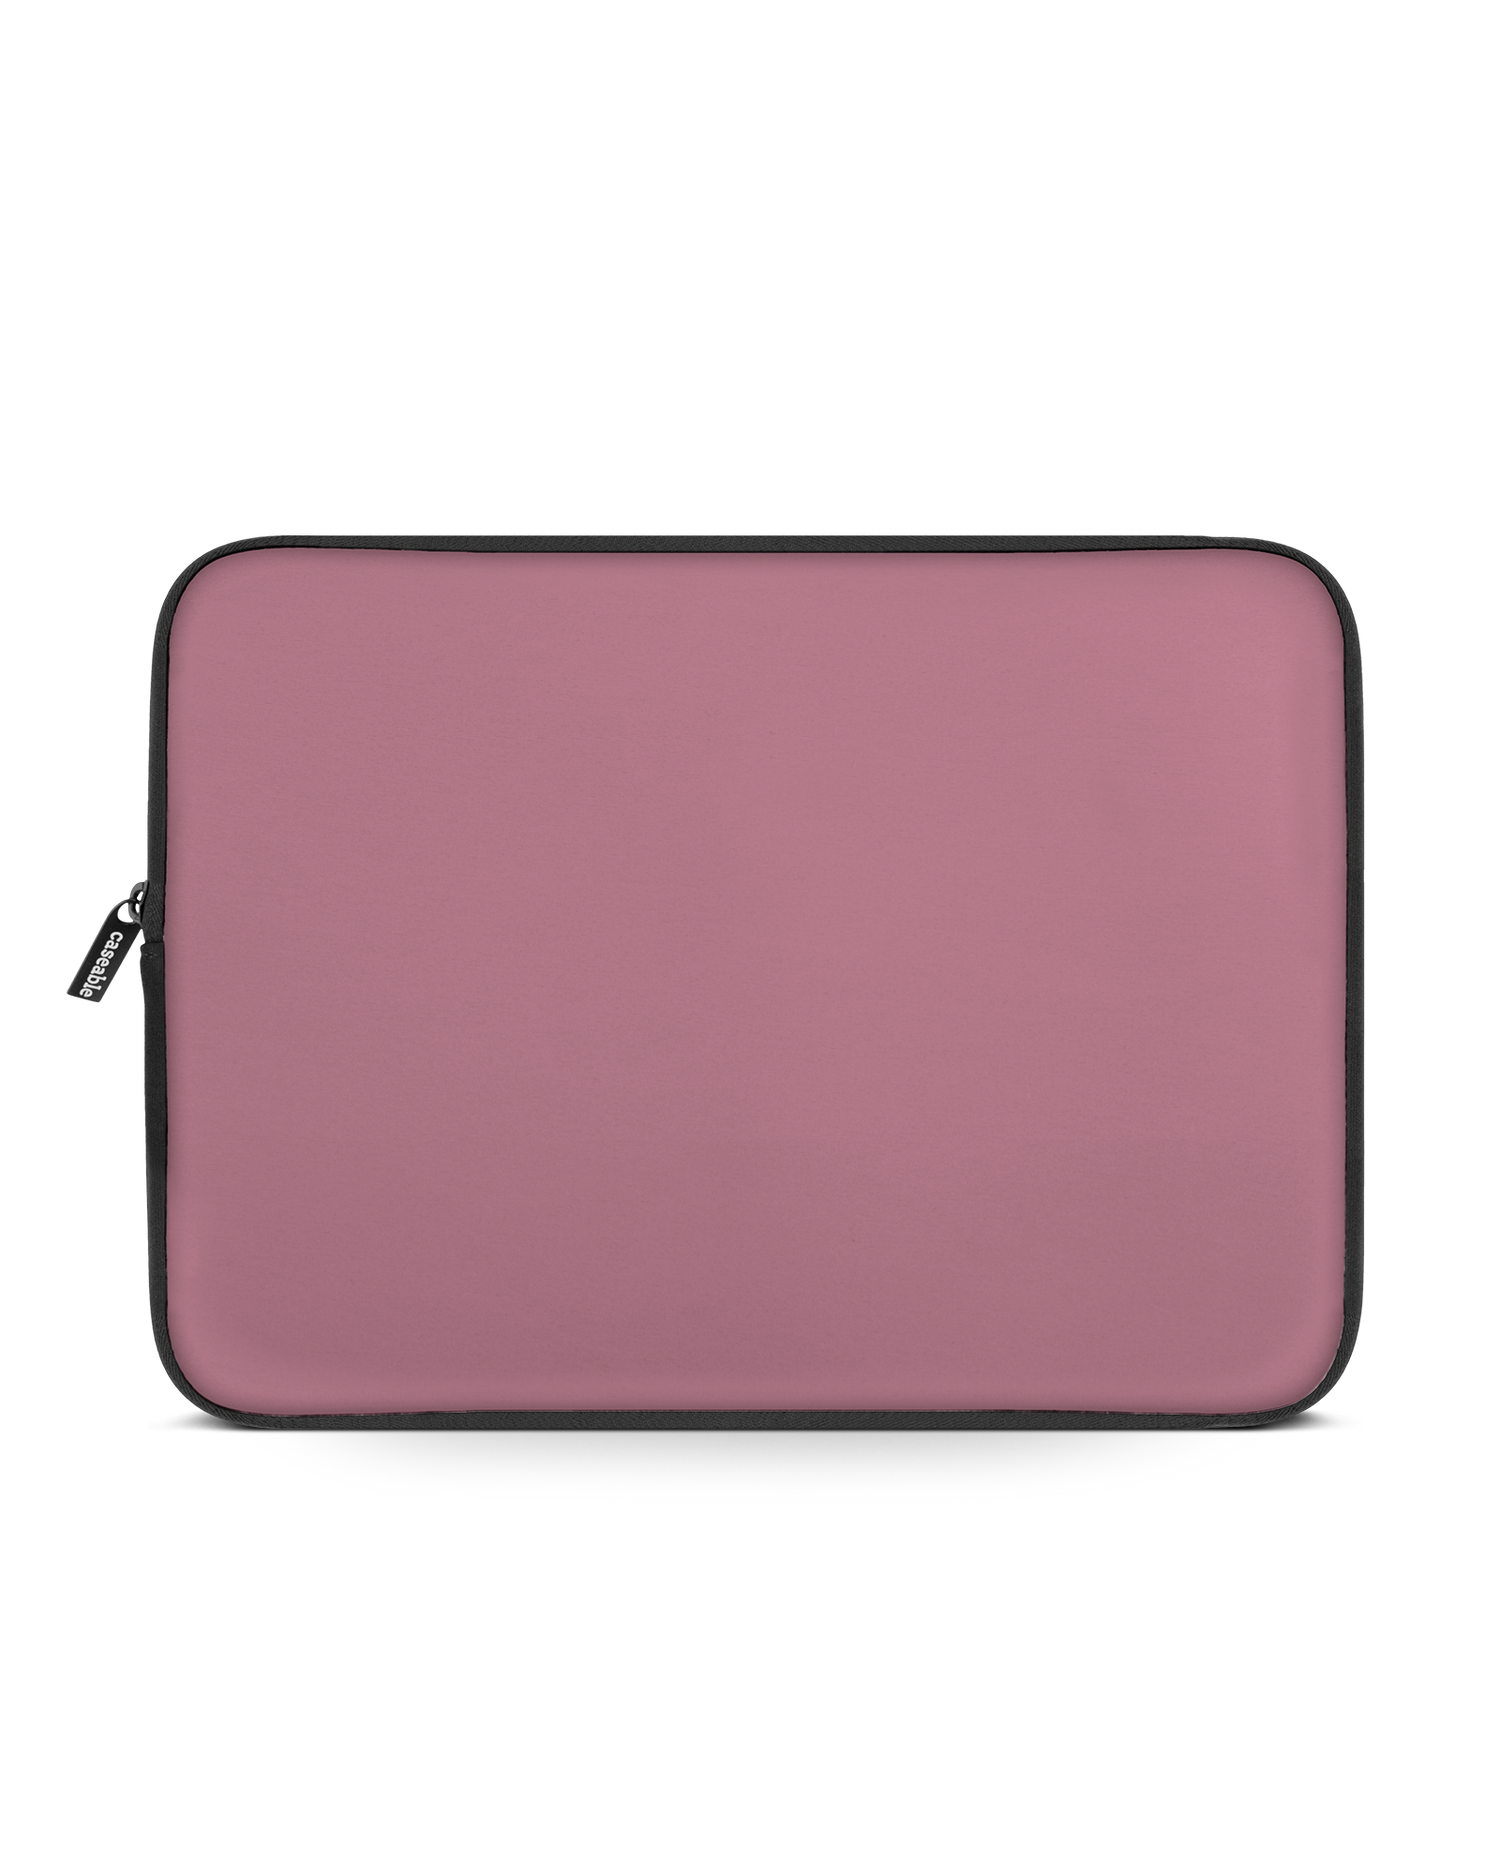 WILD ROSE Laptop Case 15 inch: Front View